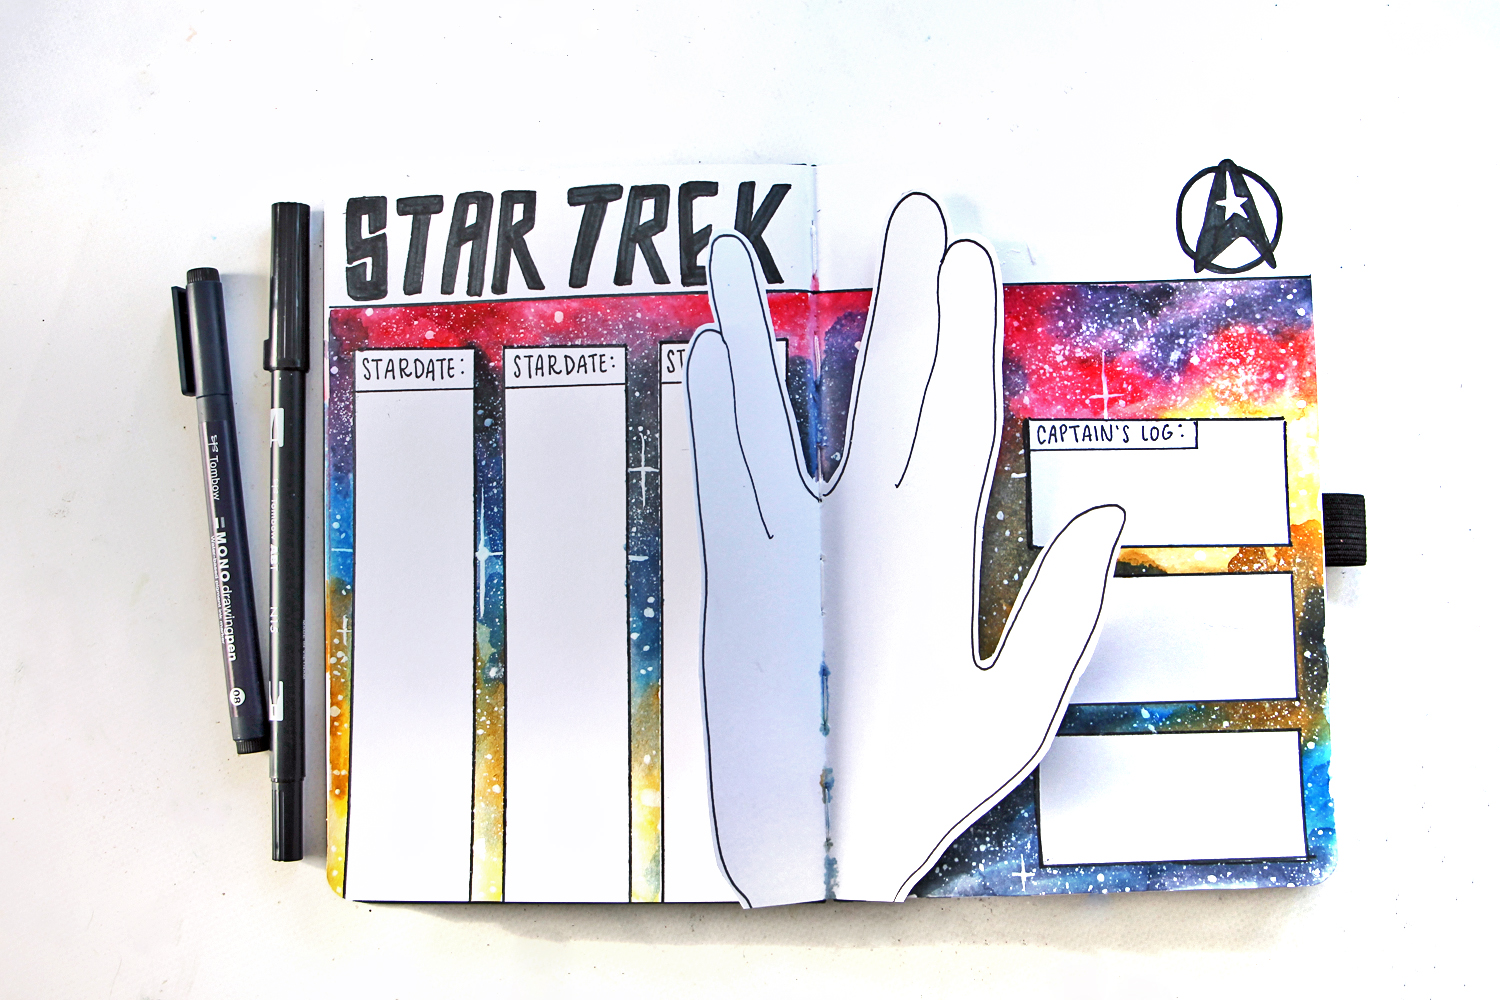 Learn how to create a Star Trek journal page, using @Tombowusa Dual Brush Pens and this tutorial by @studiokatie #tombow #tombowusa #taskjournal